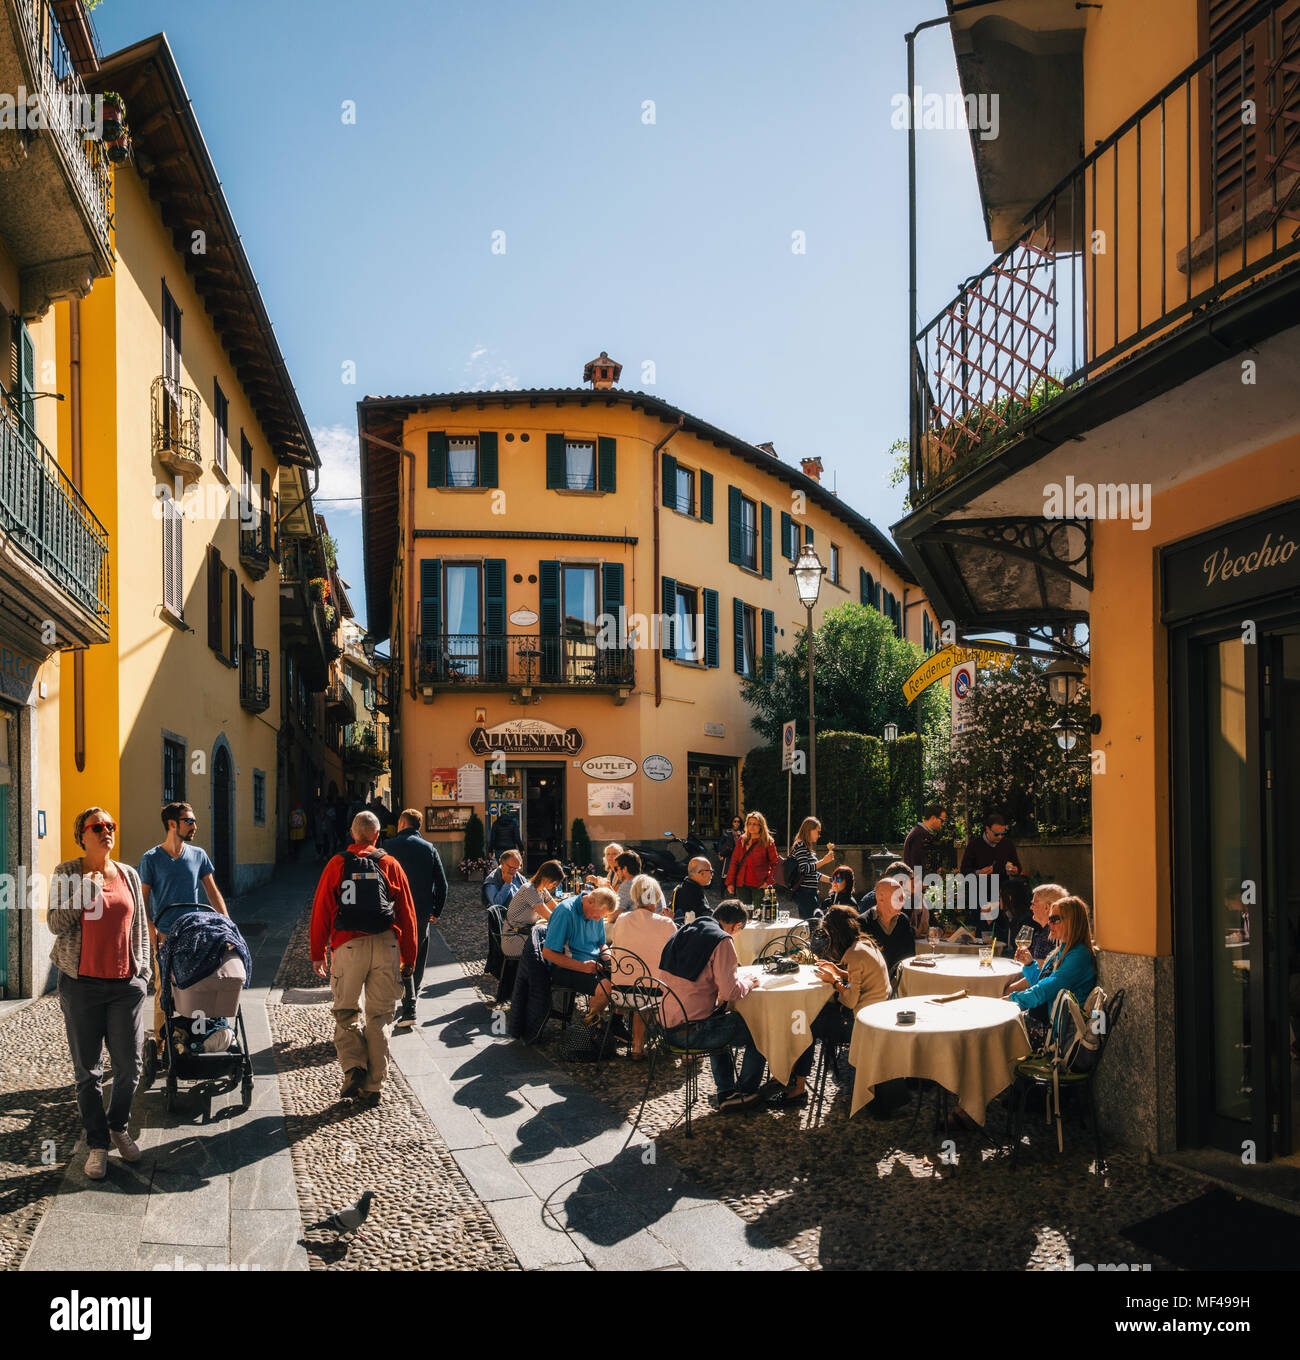 Bellagio, Italy - October 7, 2017: Tourists on narrow street with colorful houses in small town of Bellagio, Italy during sunny day. Como Lake Stock Photo